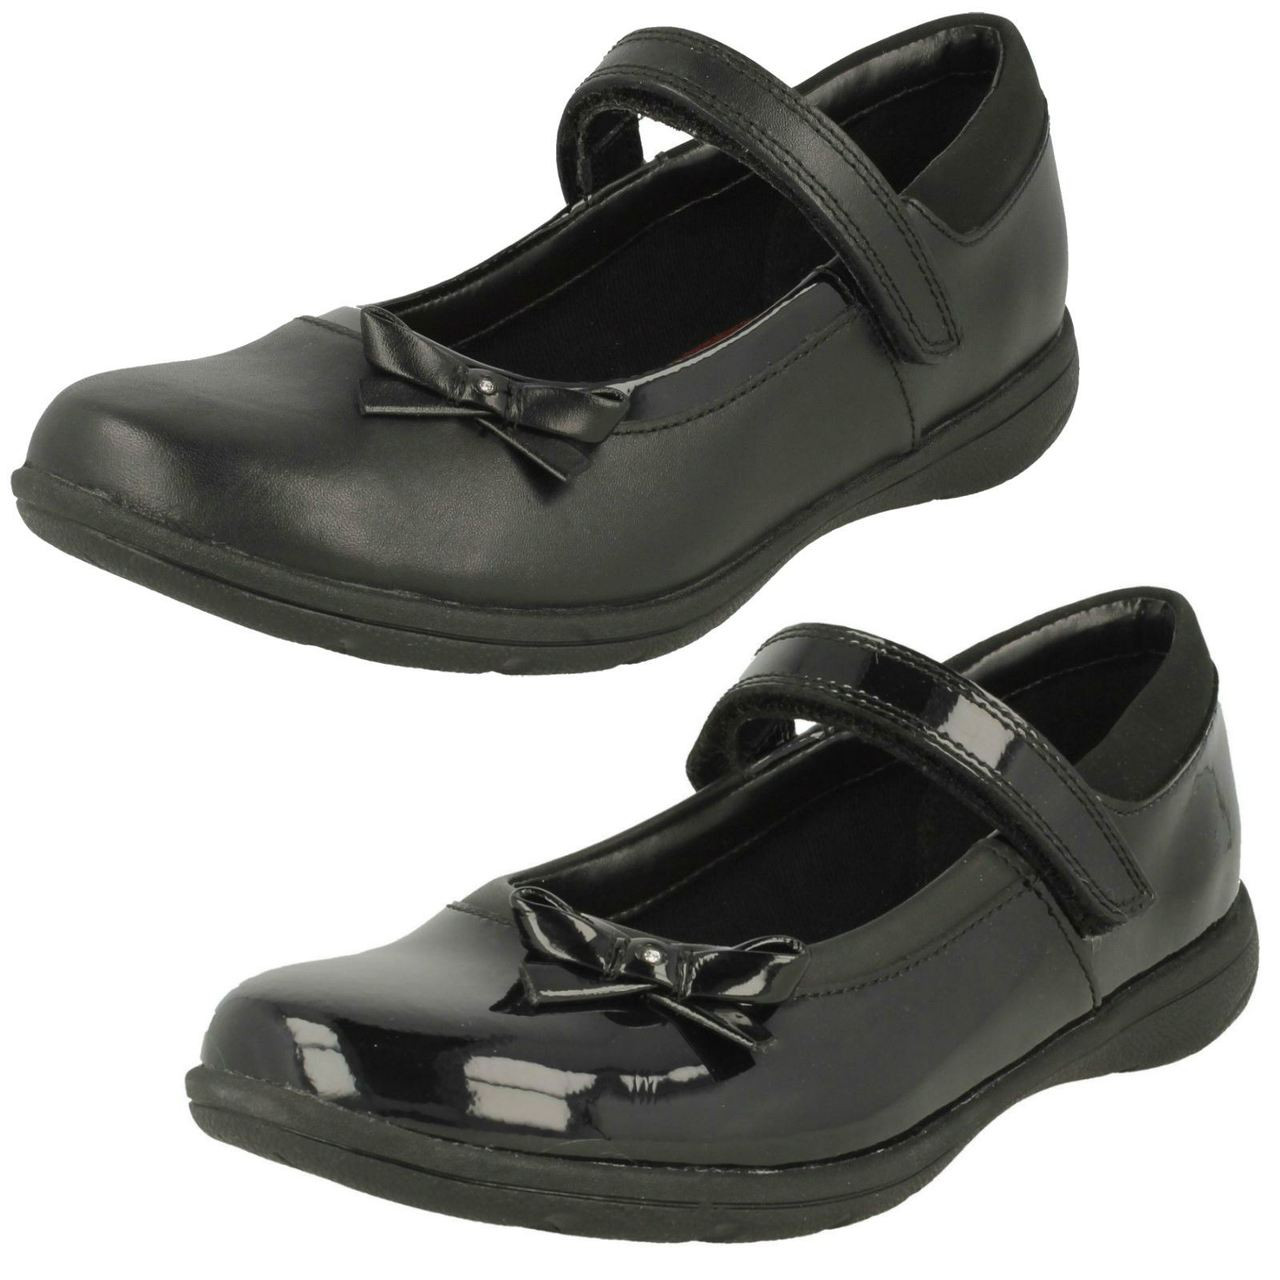 black school shoes with bow